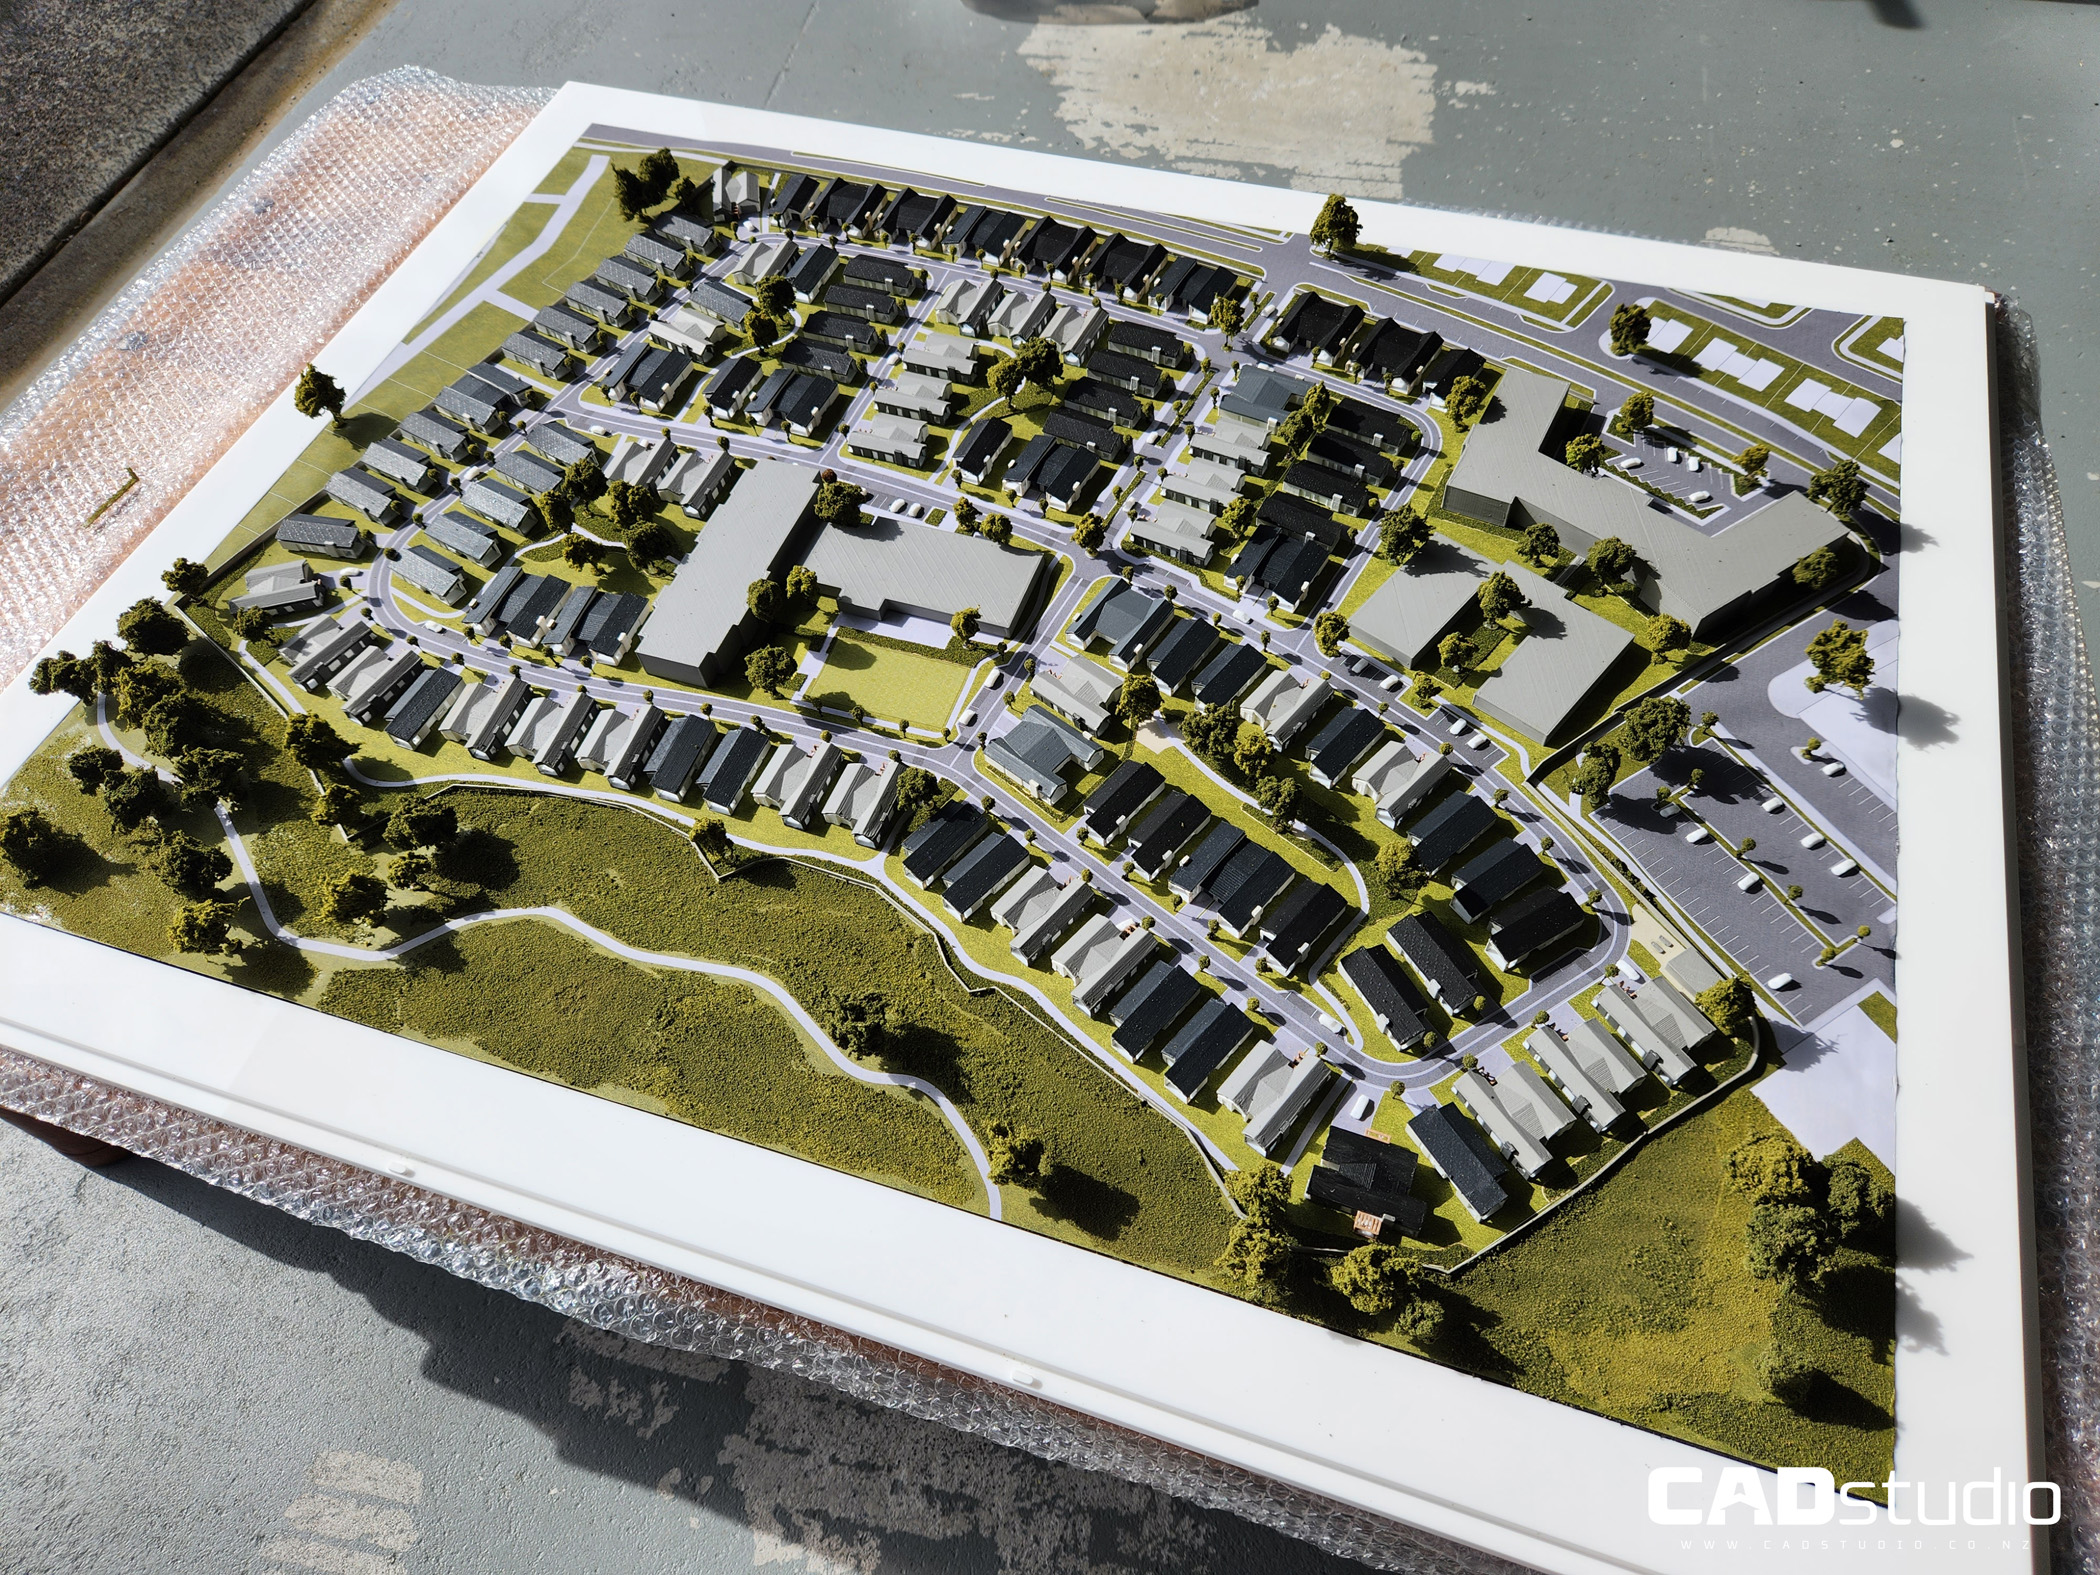 Lake Crest scale model 3D printed